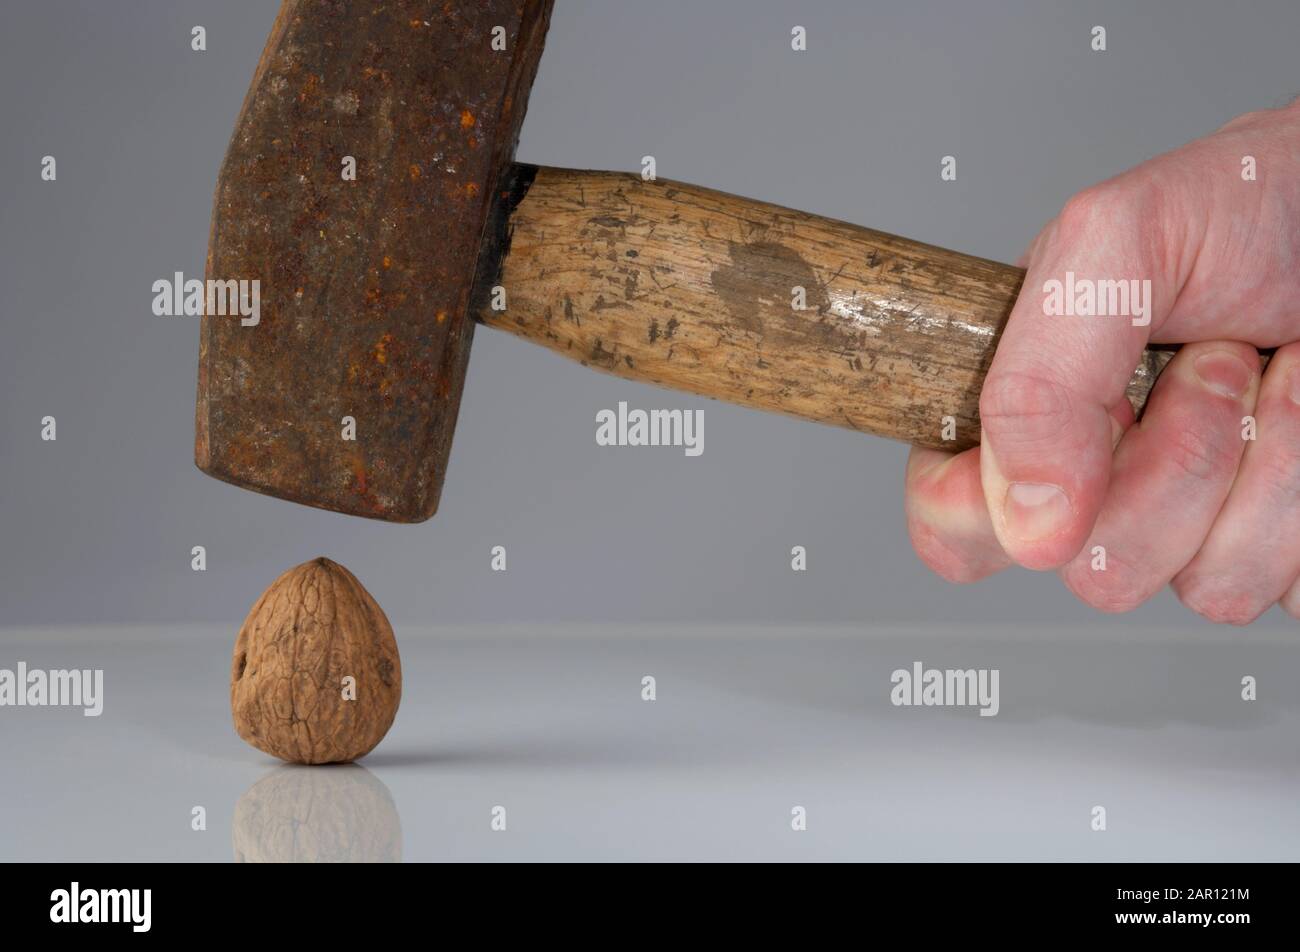 mans hand holding a hammer above a walnut  the concept of using a hammer to crack a nut or overkill Stock Photo